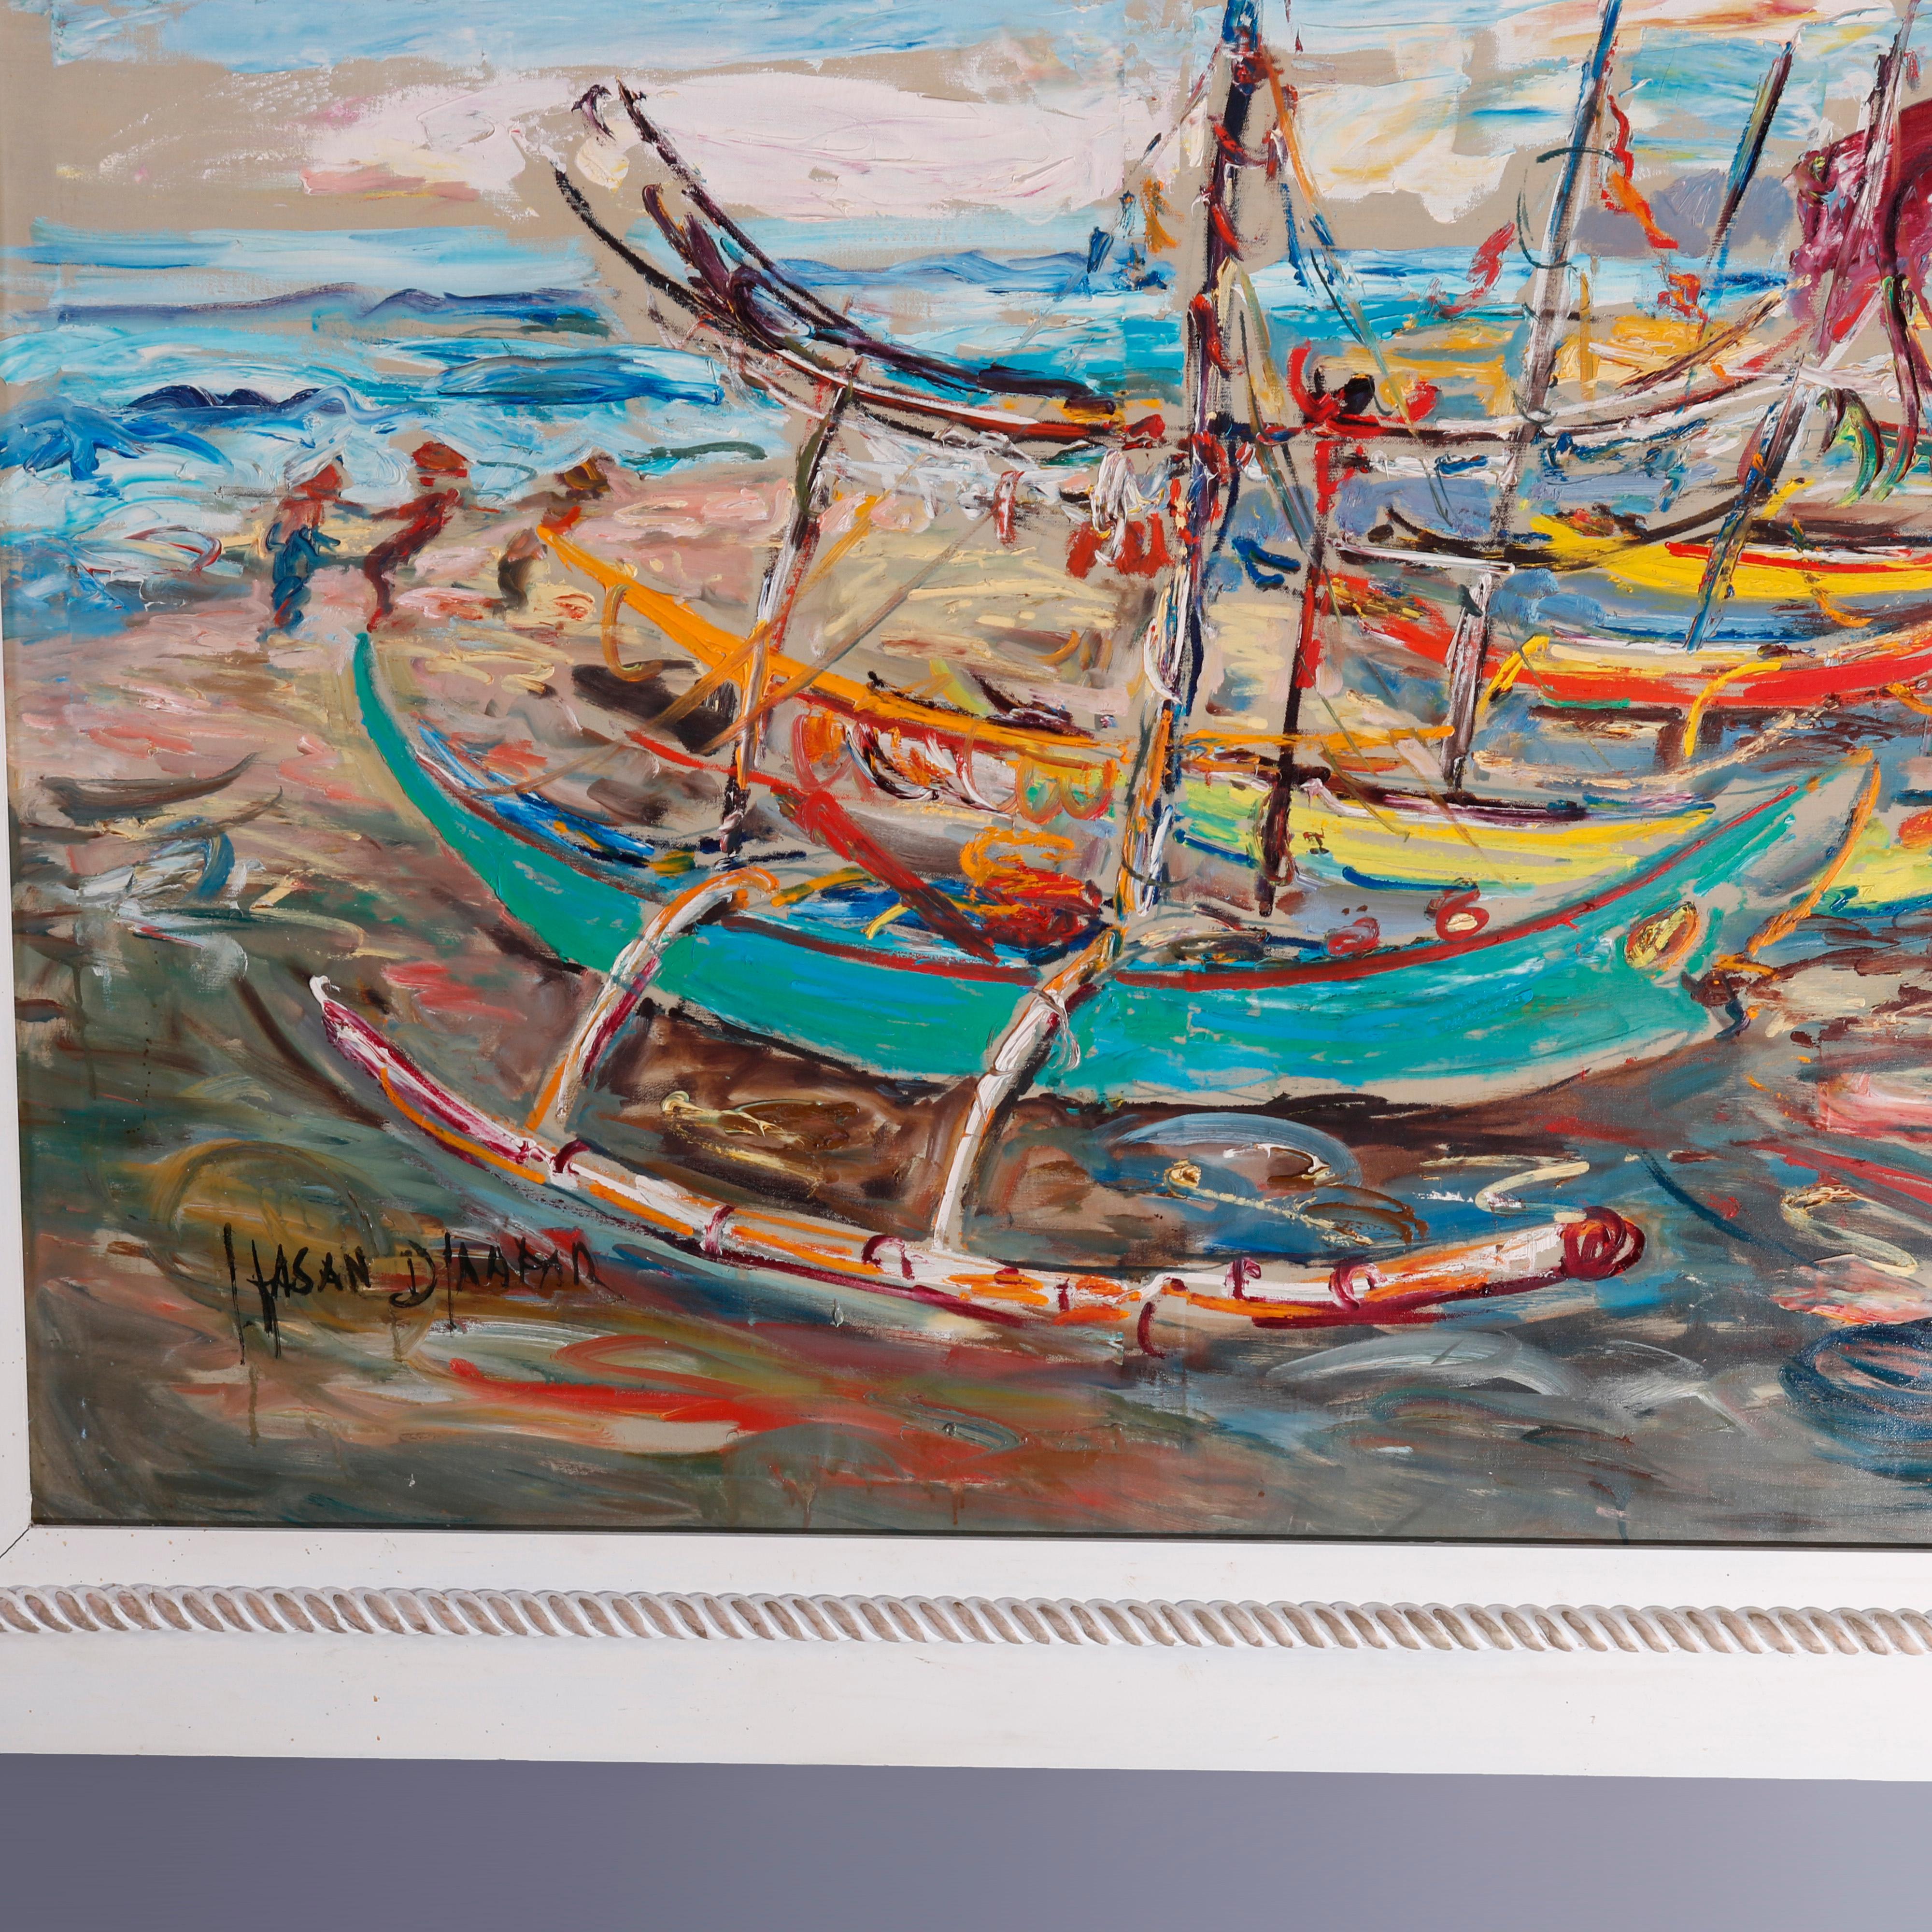 North American Large Haitian Impressionistic Oil on Canvas Boat Harbor by Has An Djaafar, c1940